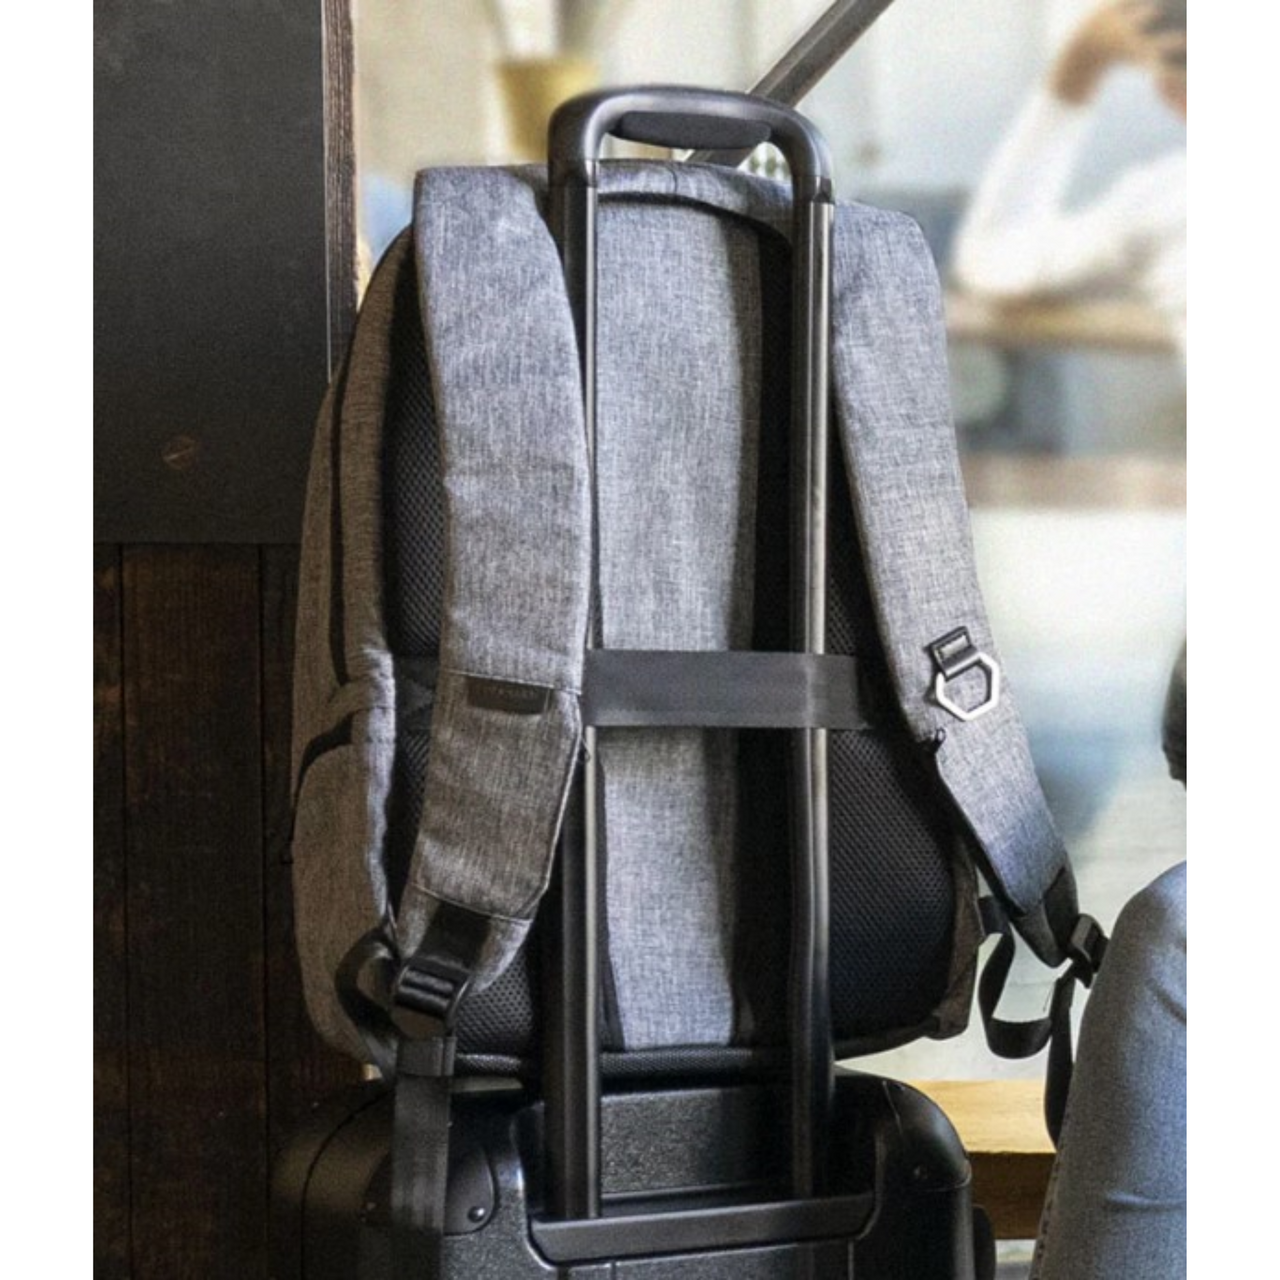 Solgaard Lifepack Backpack - Monroe Systems for Business